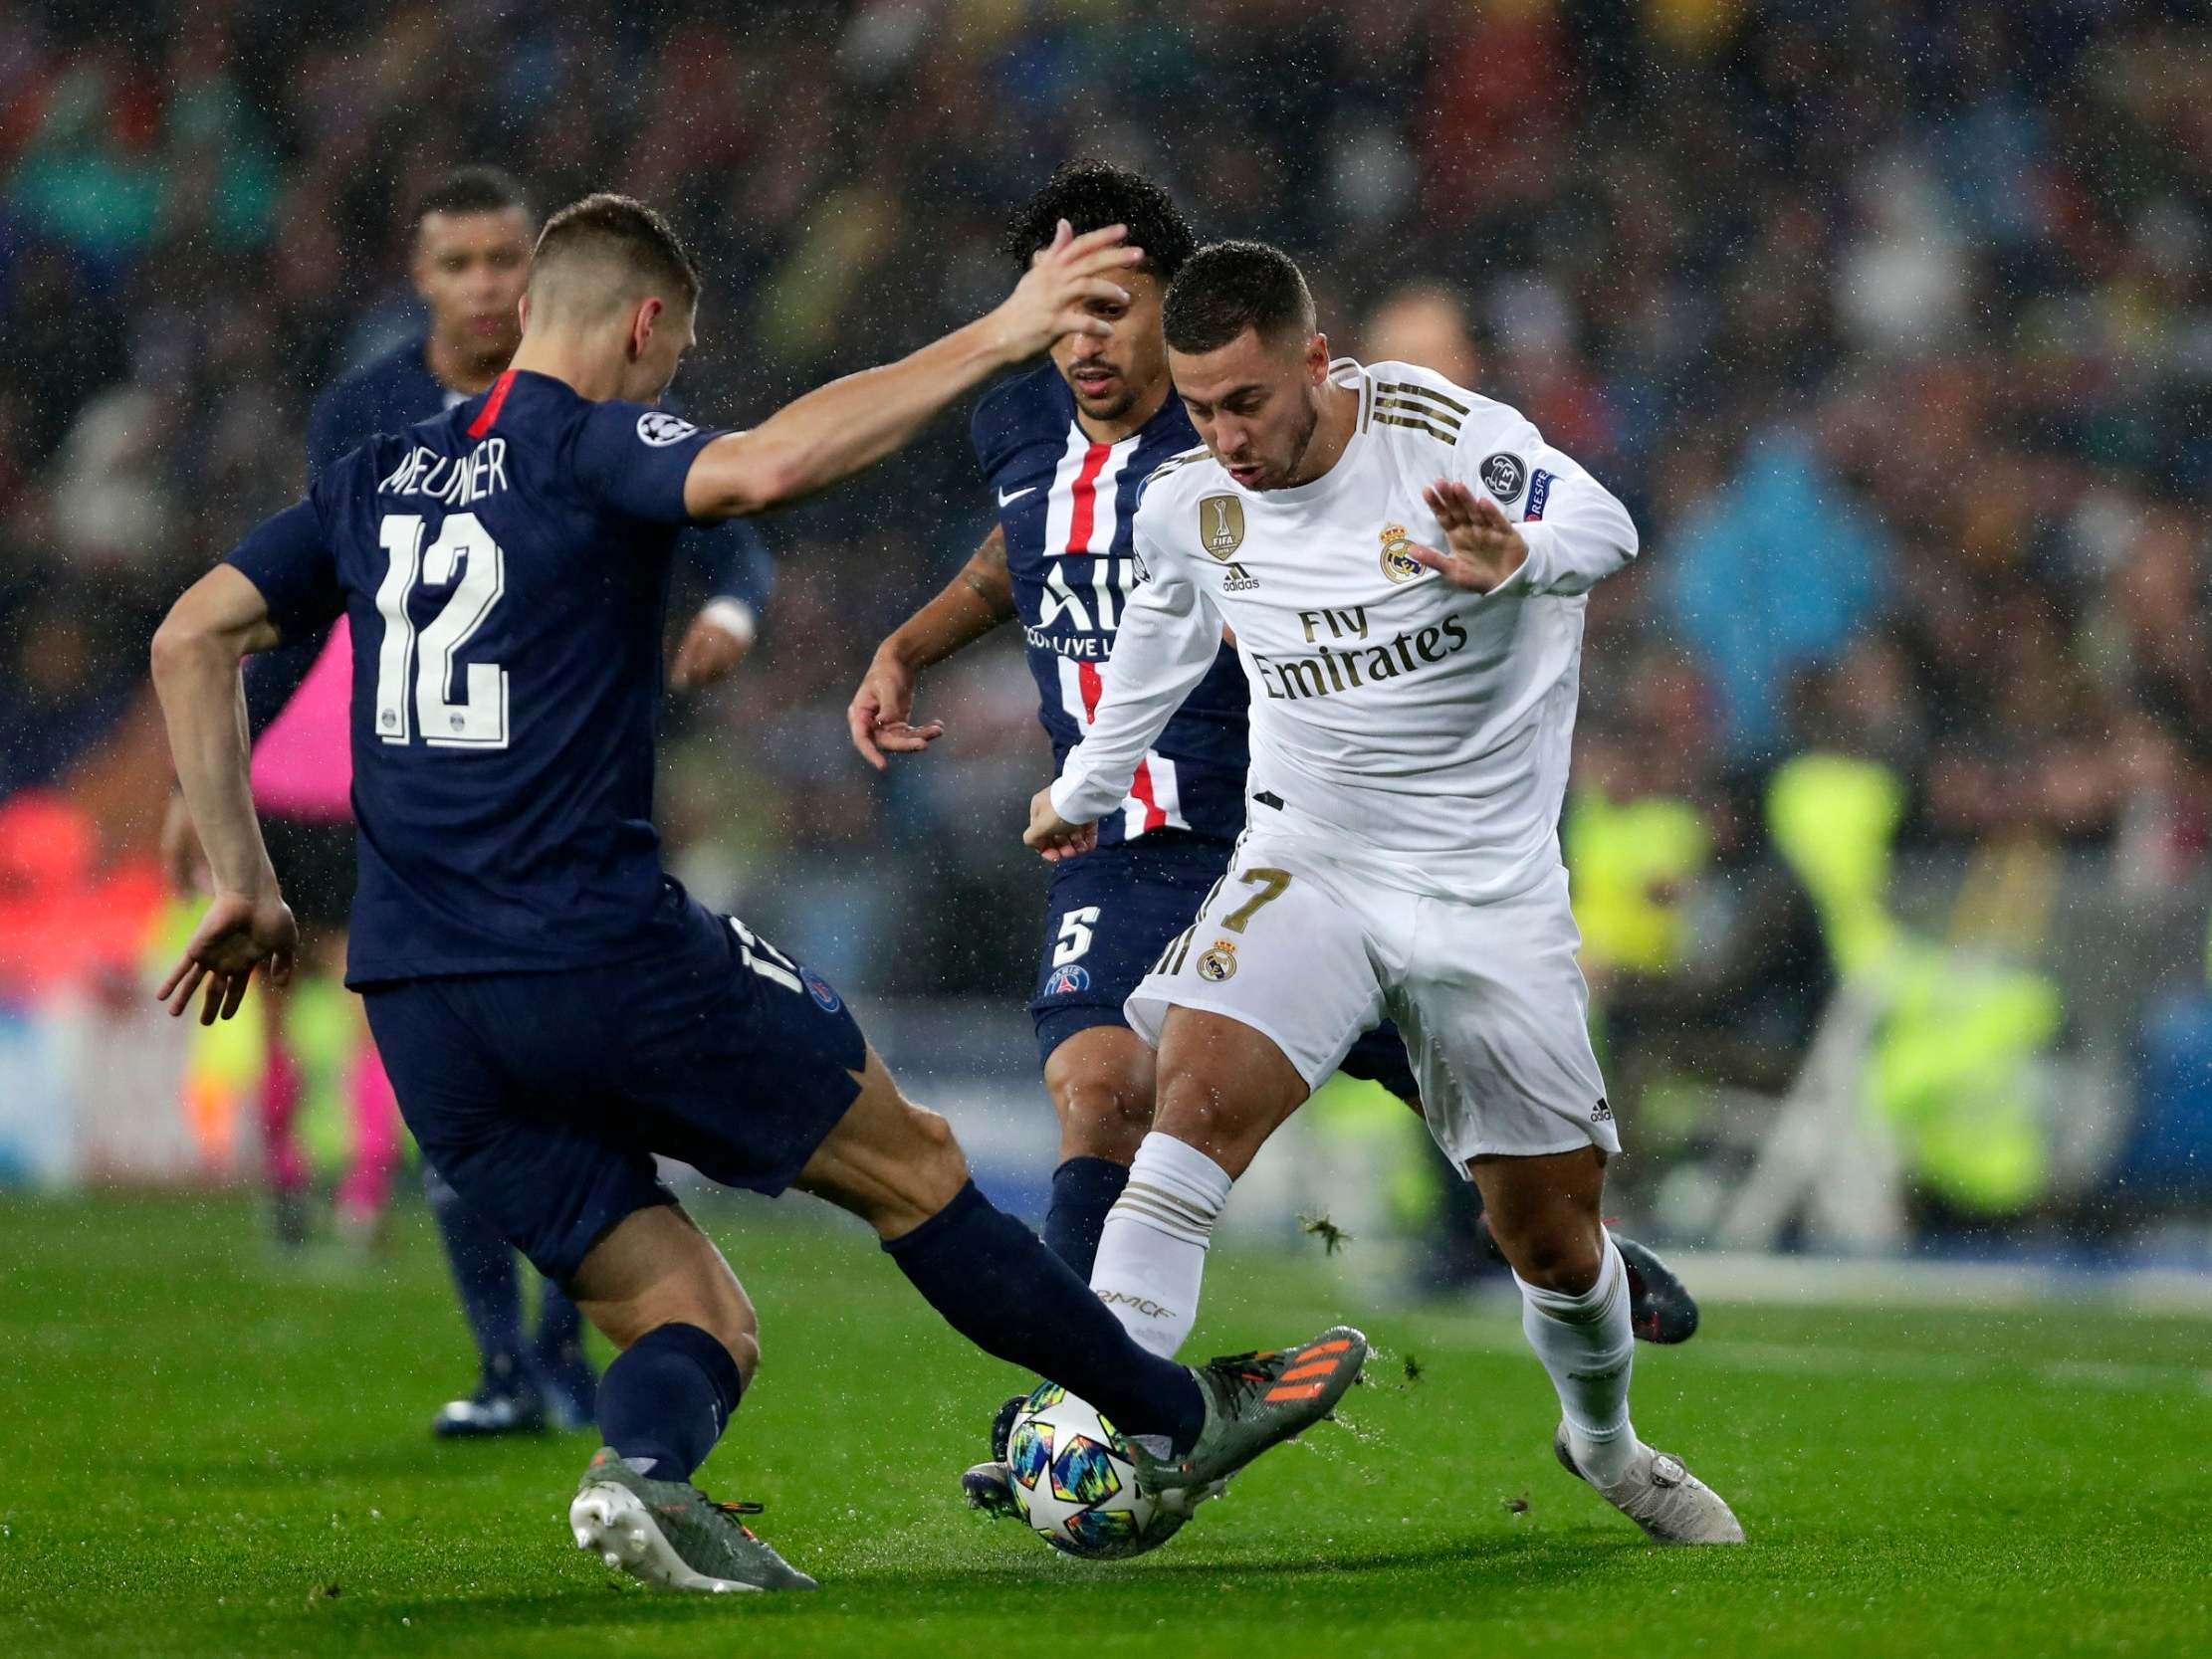 Real Madrid vs PSG LIVE: Latest score and updates from Champions League - The Independent - The Independent